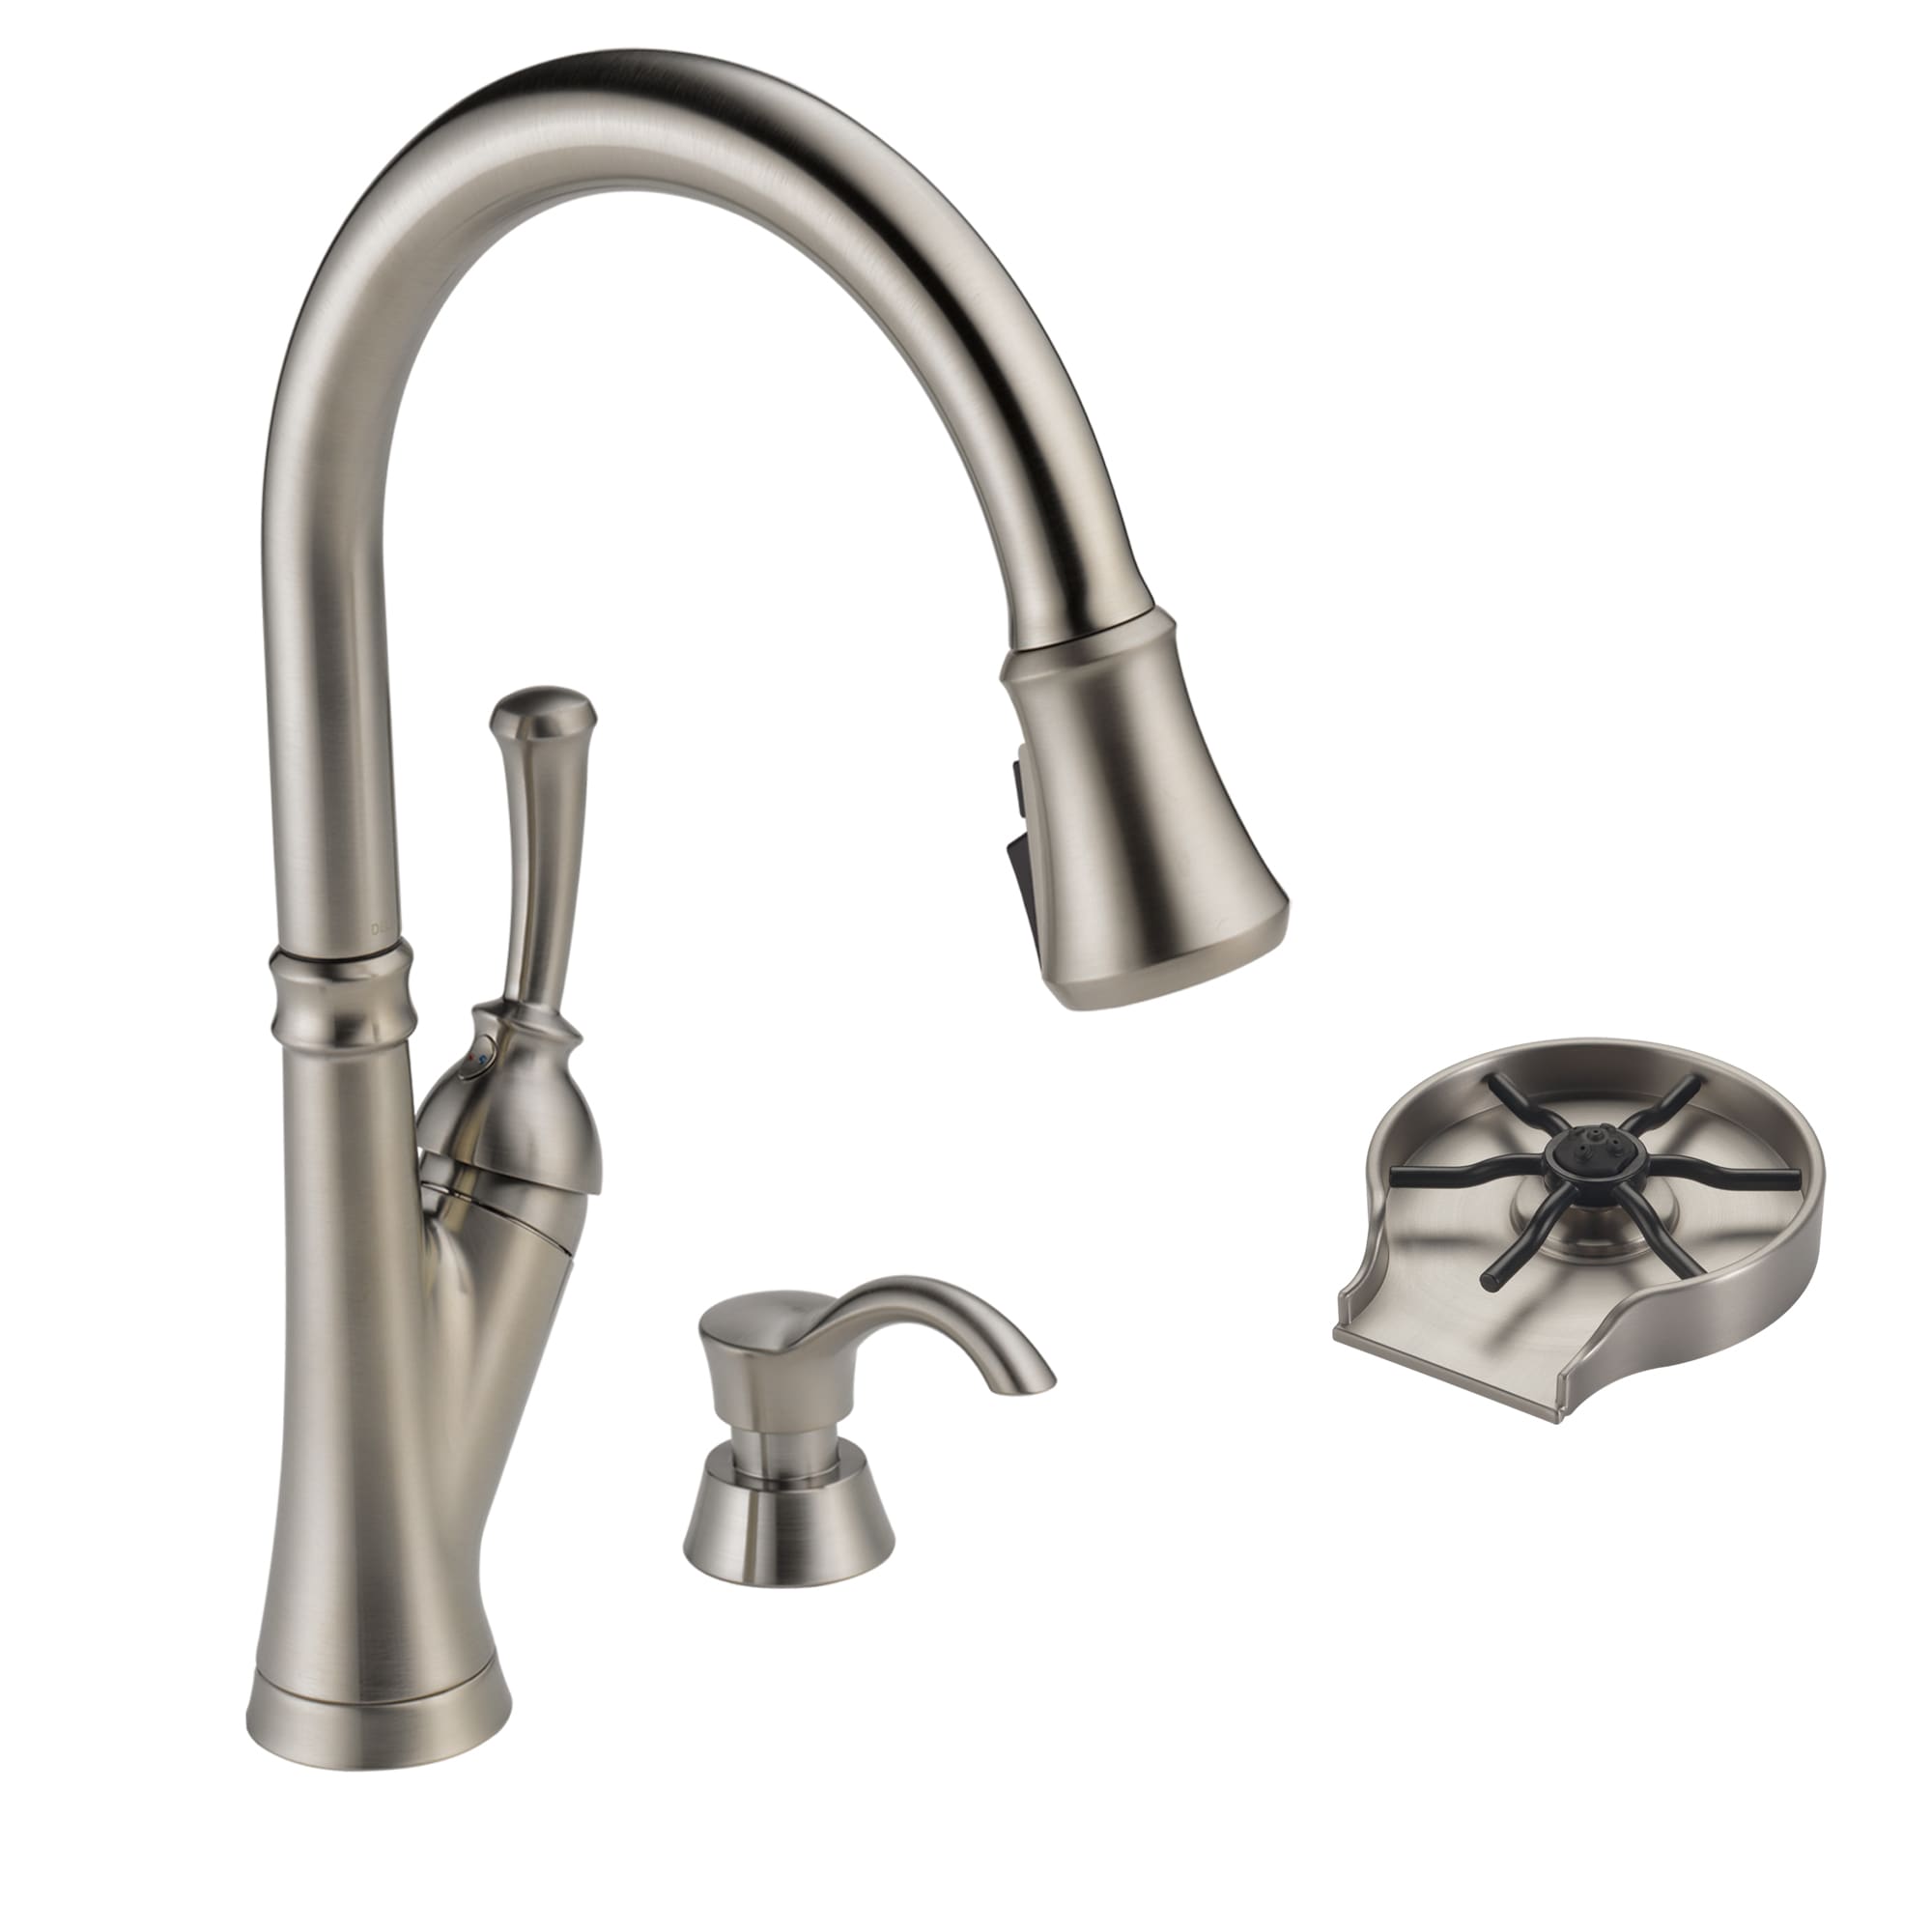 Delta Savile Stainless 1-Handle Deck-Mount Pull-Down Handle Kitchen Faucet (Deck Plate Included) with Spotshield Stainless Faucet Glass Rinser